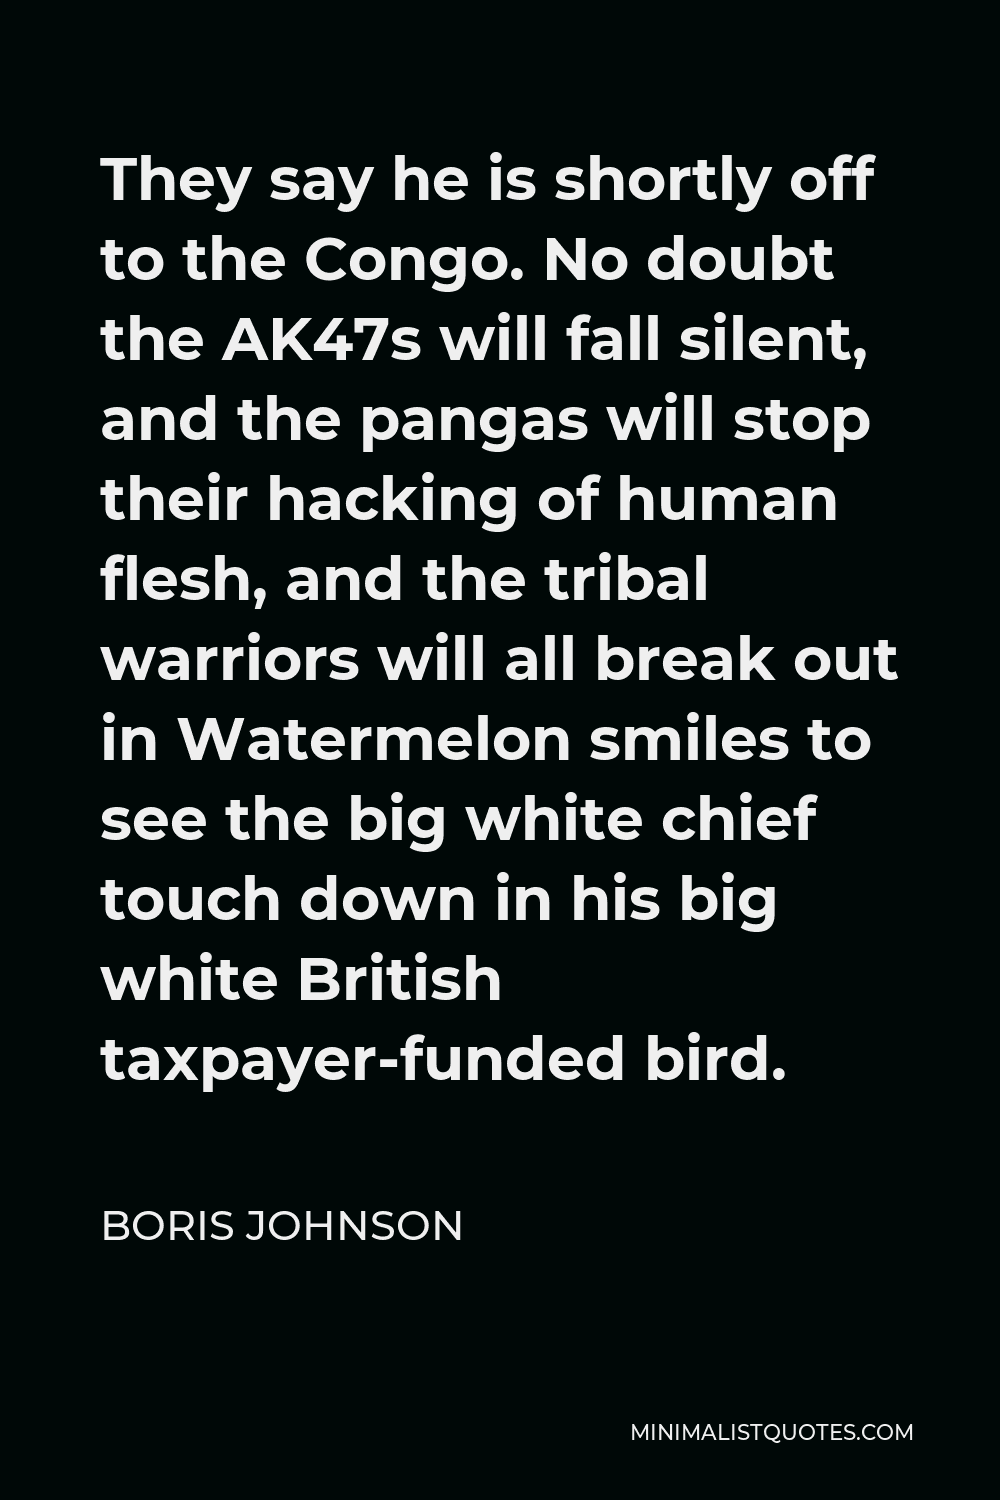 Boris Johnson Quote - They say he is shortly off to the Congo. No doubt the AK47s will fall silent, and the pangas will stop their hacking of human flesh, and the tribal warriors will all break out in Watermelon smiles to see the big white chief touch down in his big white British taxpayer-funded bird.